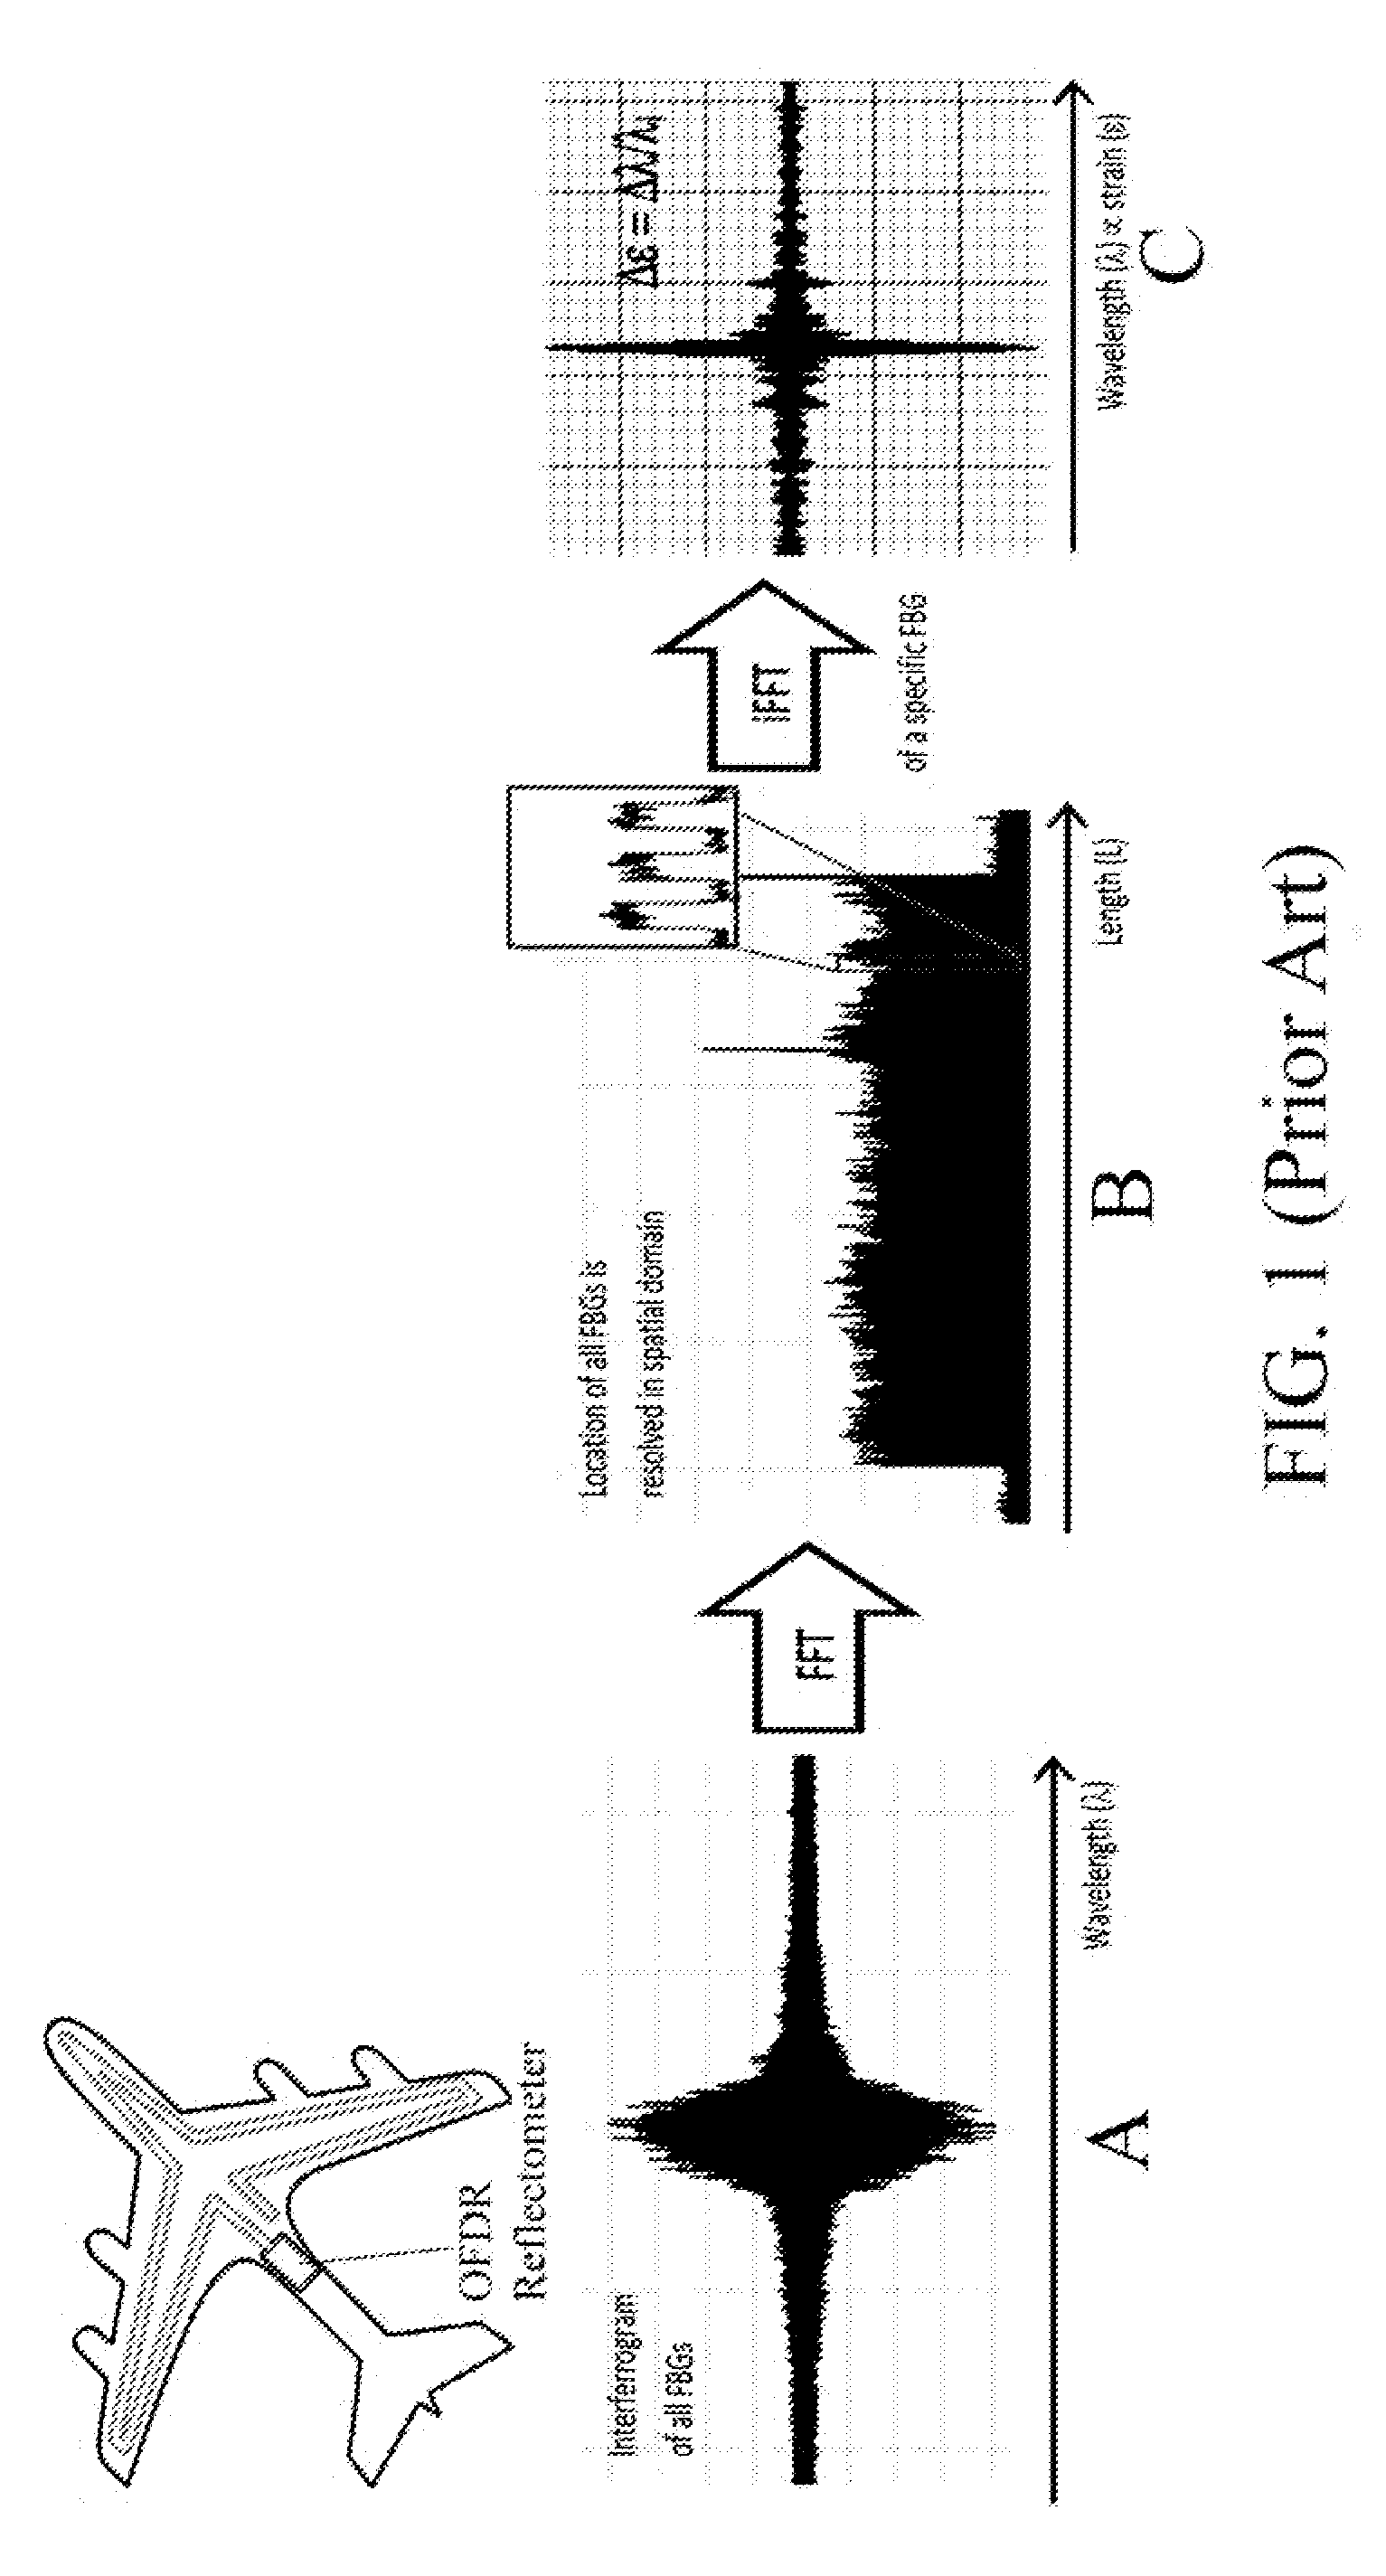 Method and apparatus of multiplexing and acquiring data from multiple optical fibers using a single data channel of an optical frequency-domain reflectometry (OFDR) system